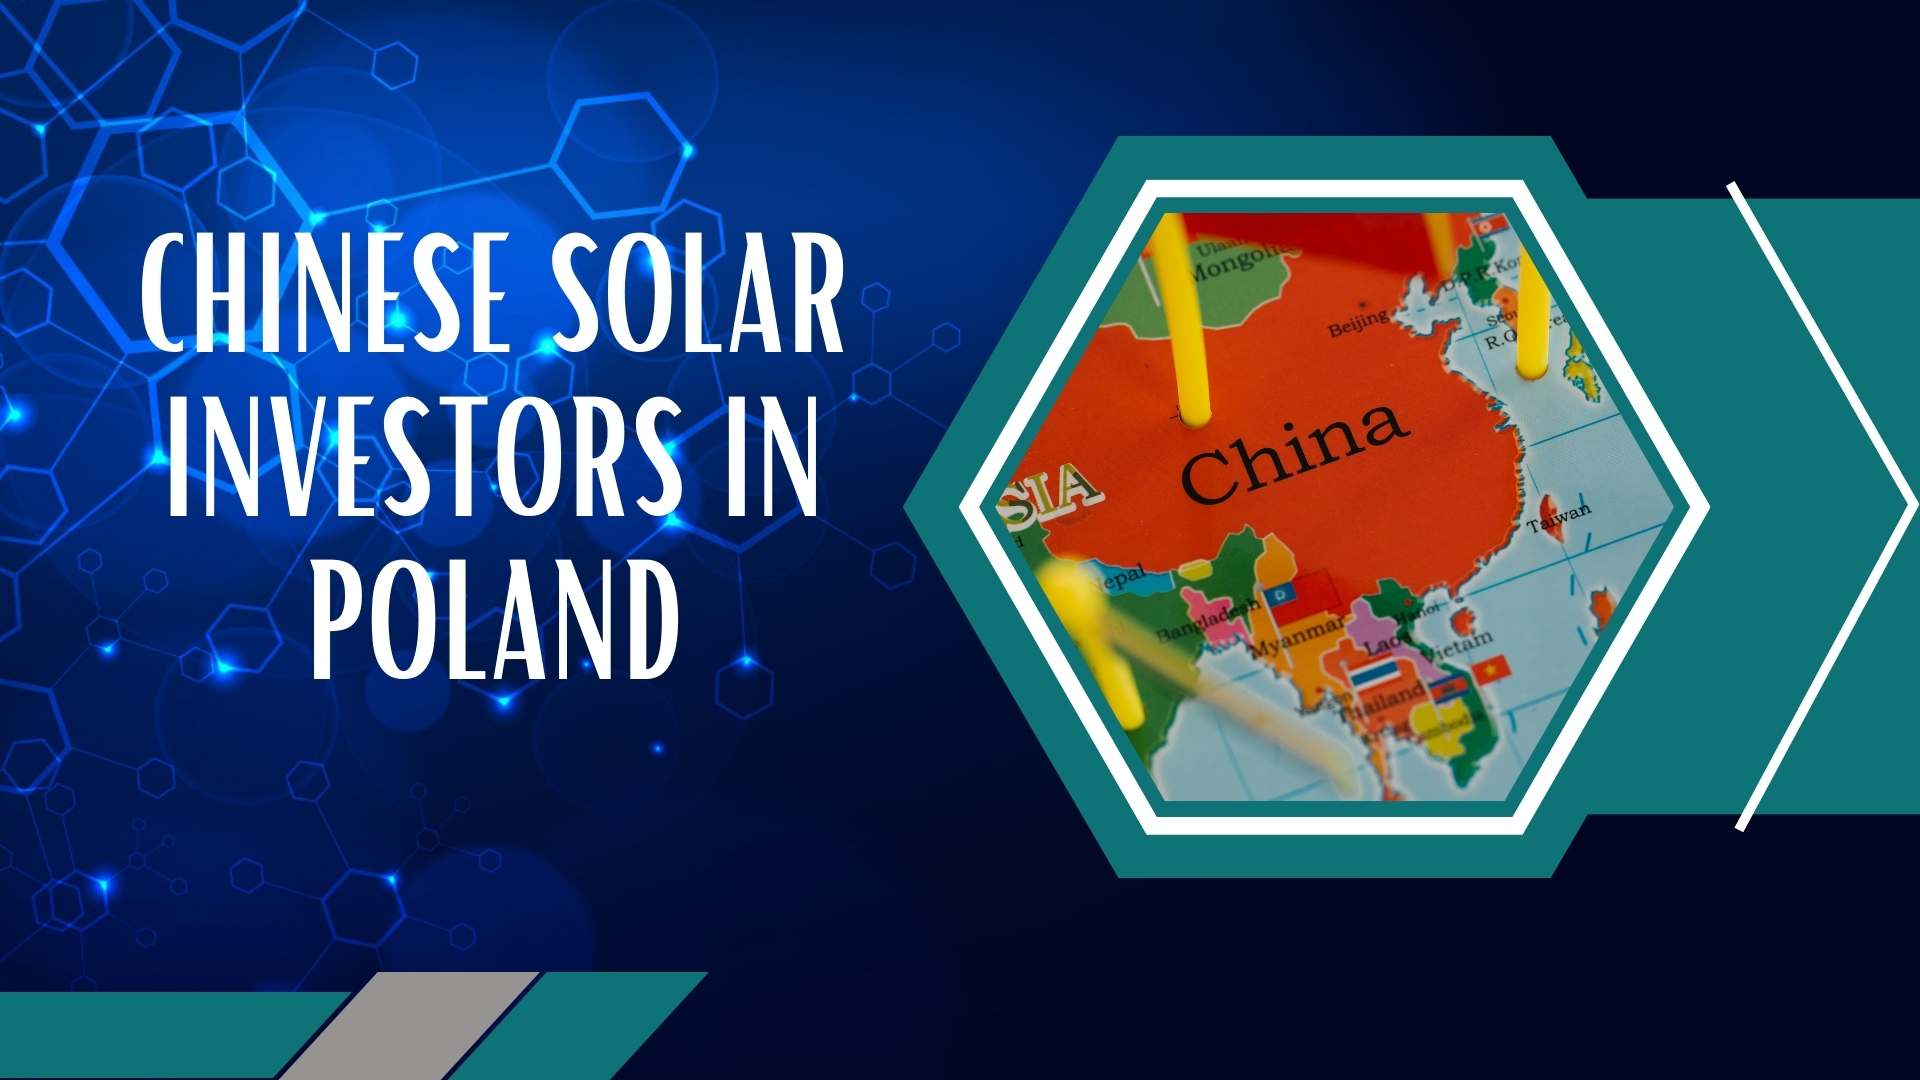 Chinese solar investors in Poland